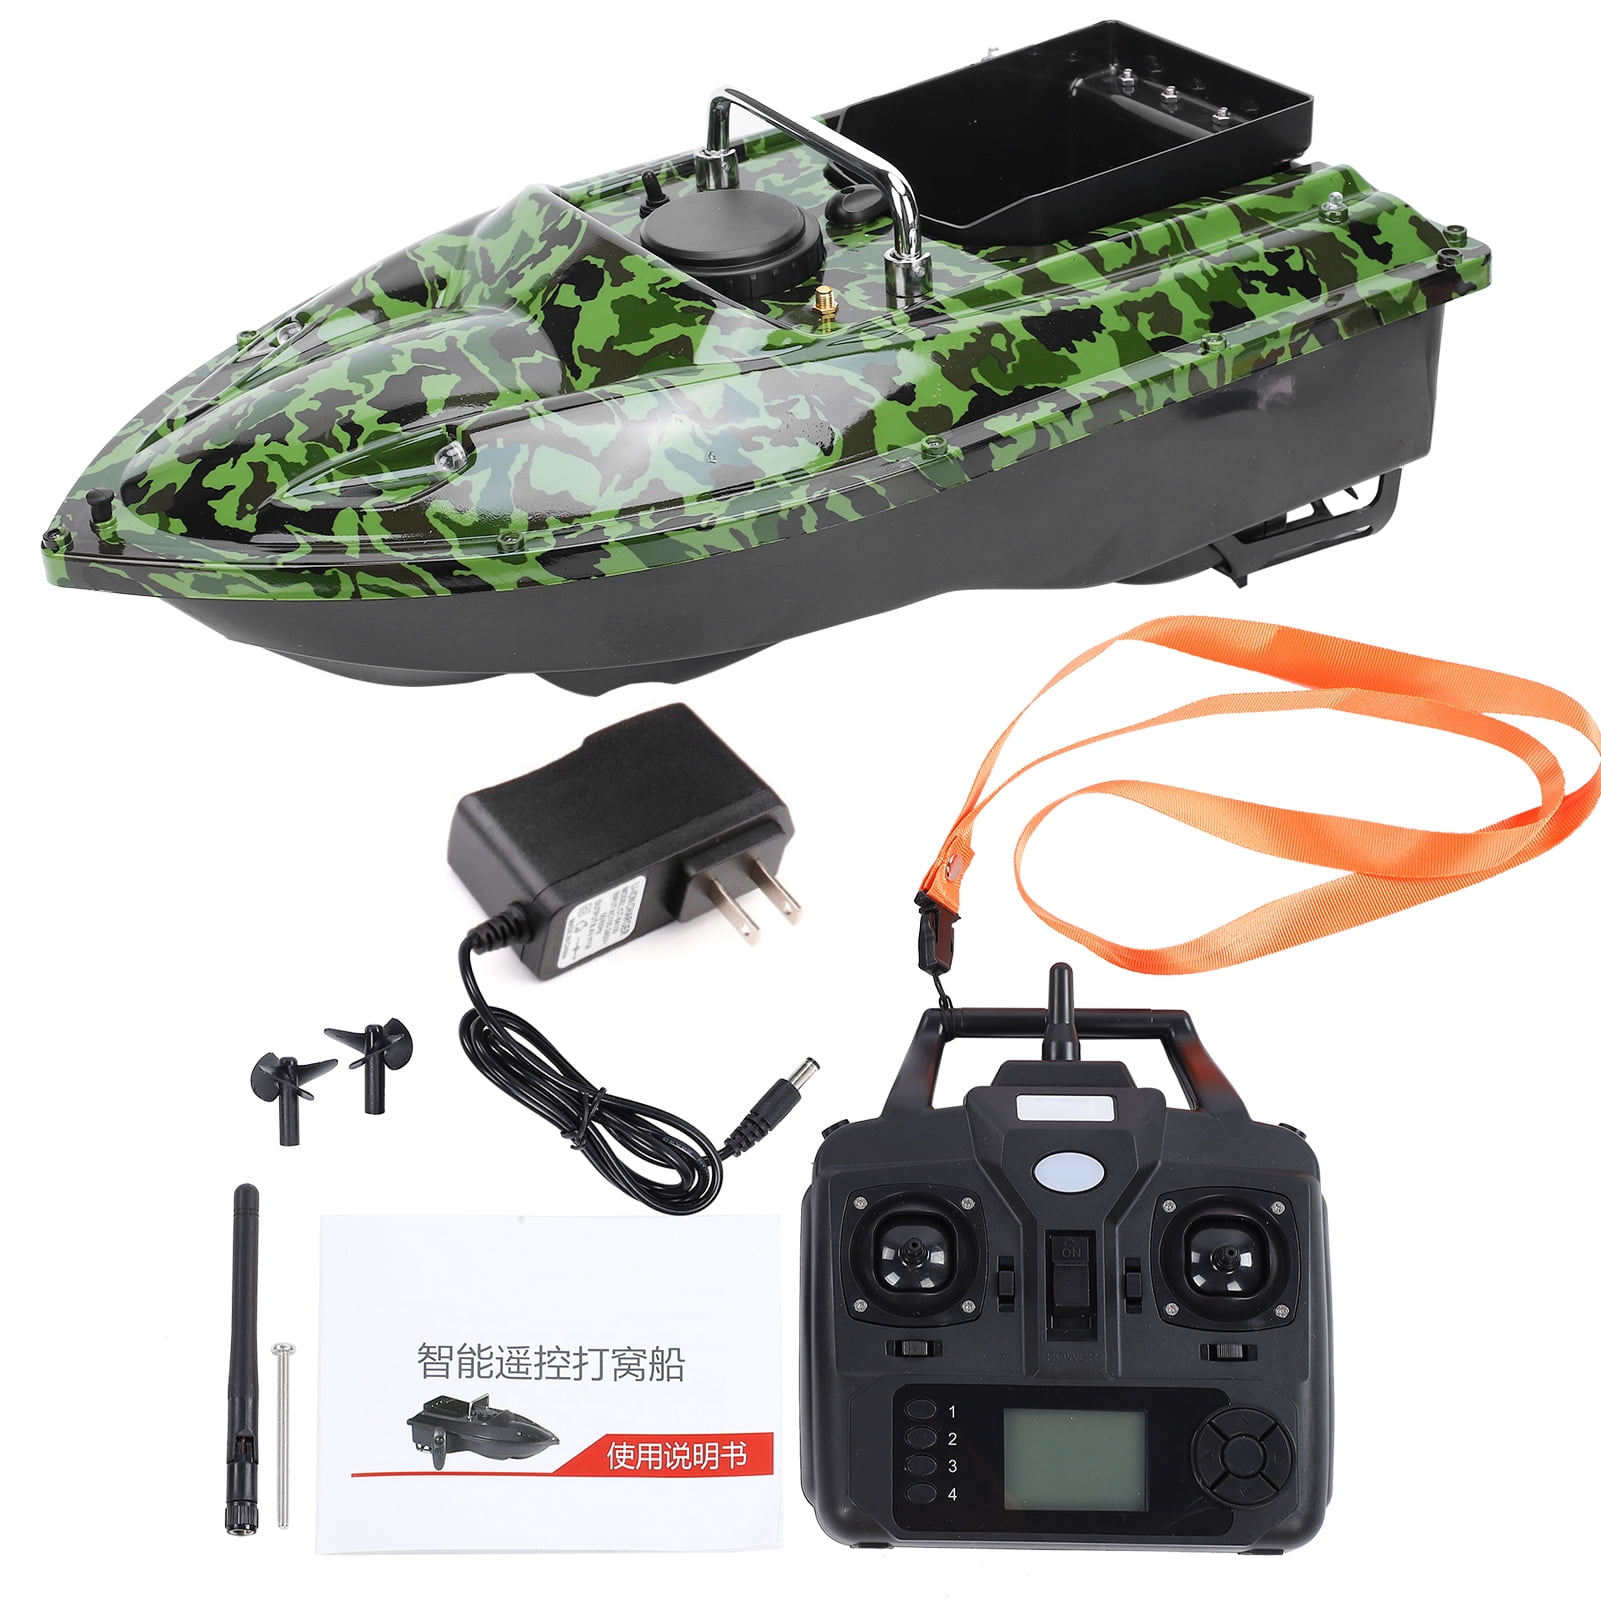 Details about   Waterproof Remote Control Fishing Bait Nesting Boat Fishing Accessories 100-240V